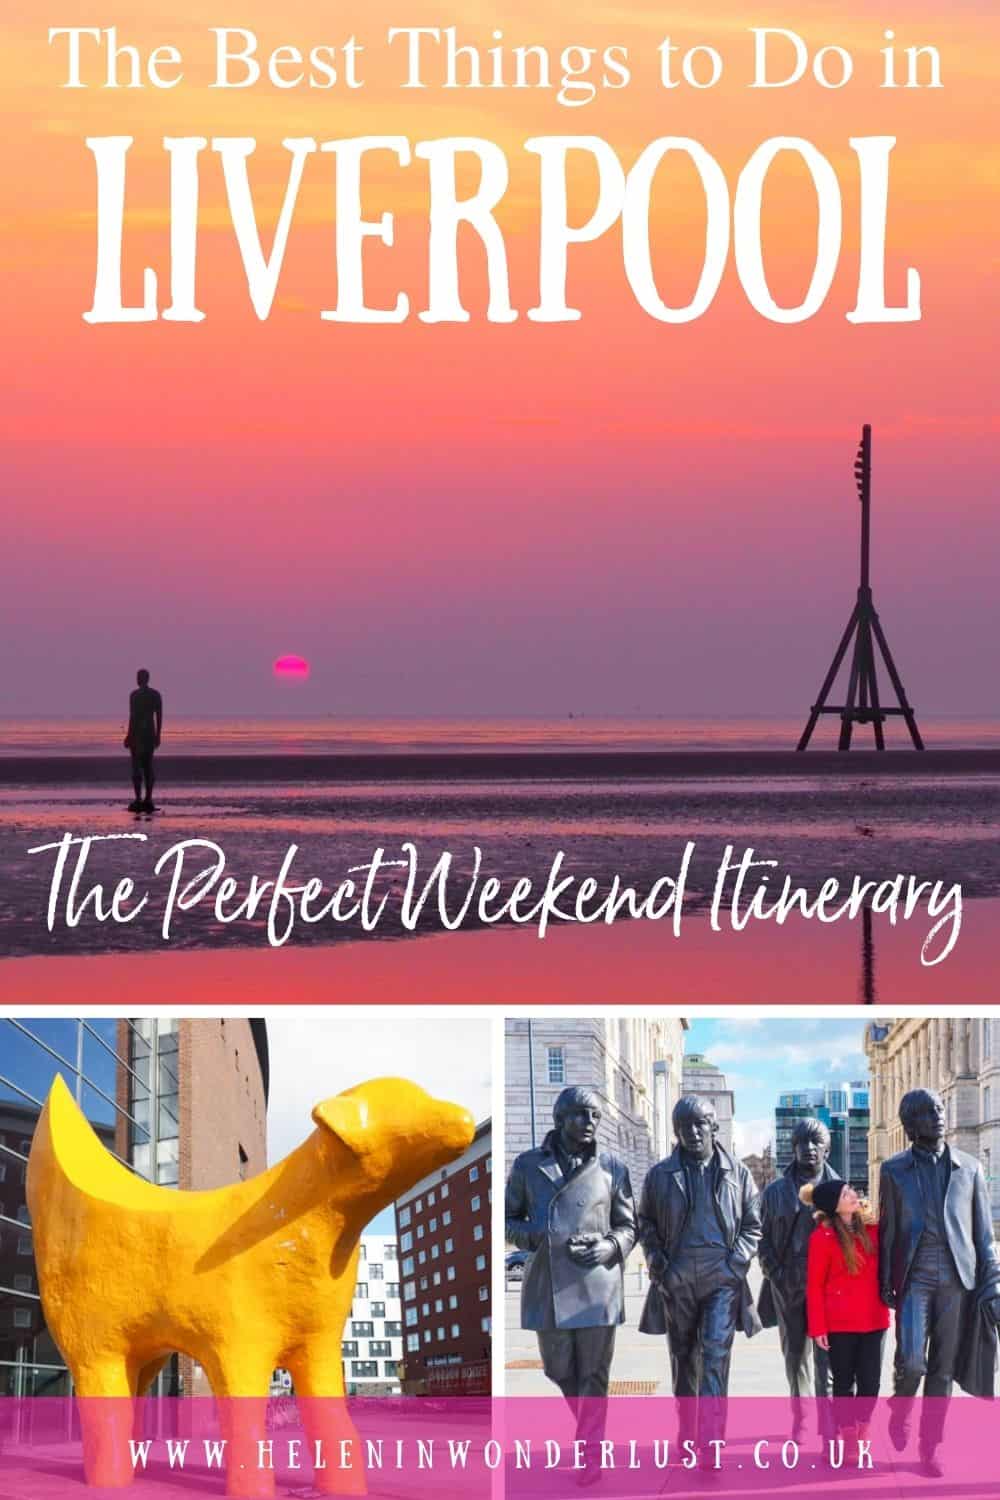 The Best Things to Do in Liverpool - The Perfect Weekend Itinerary